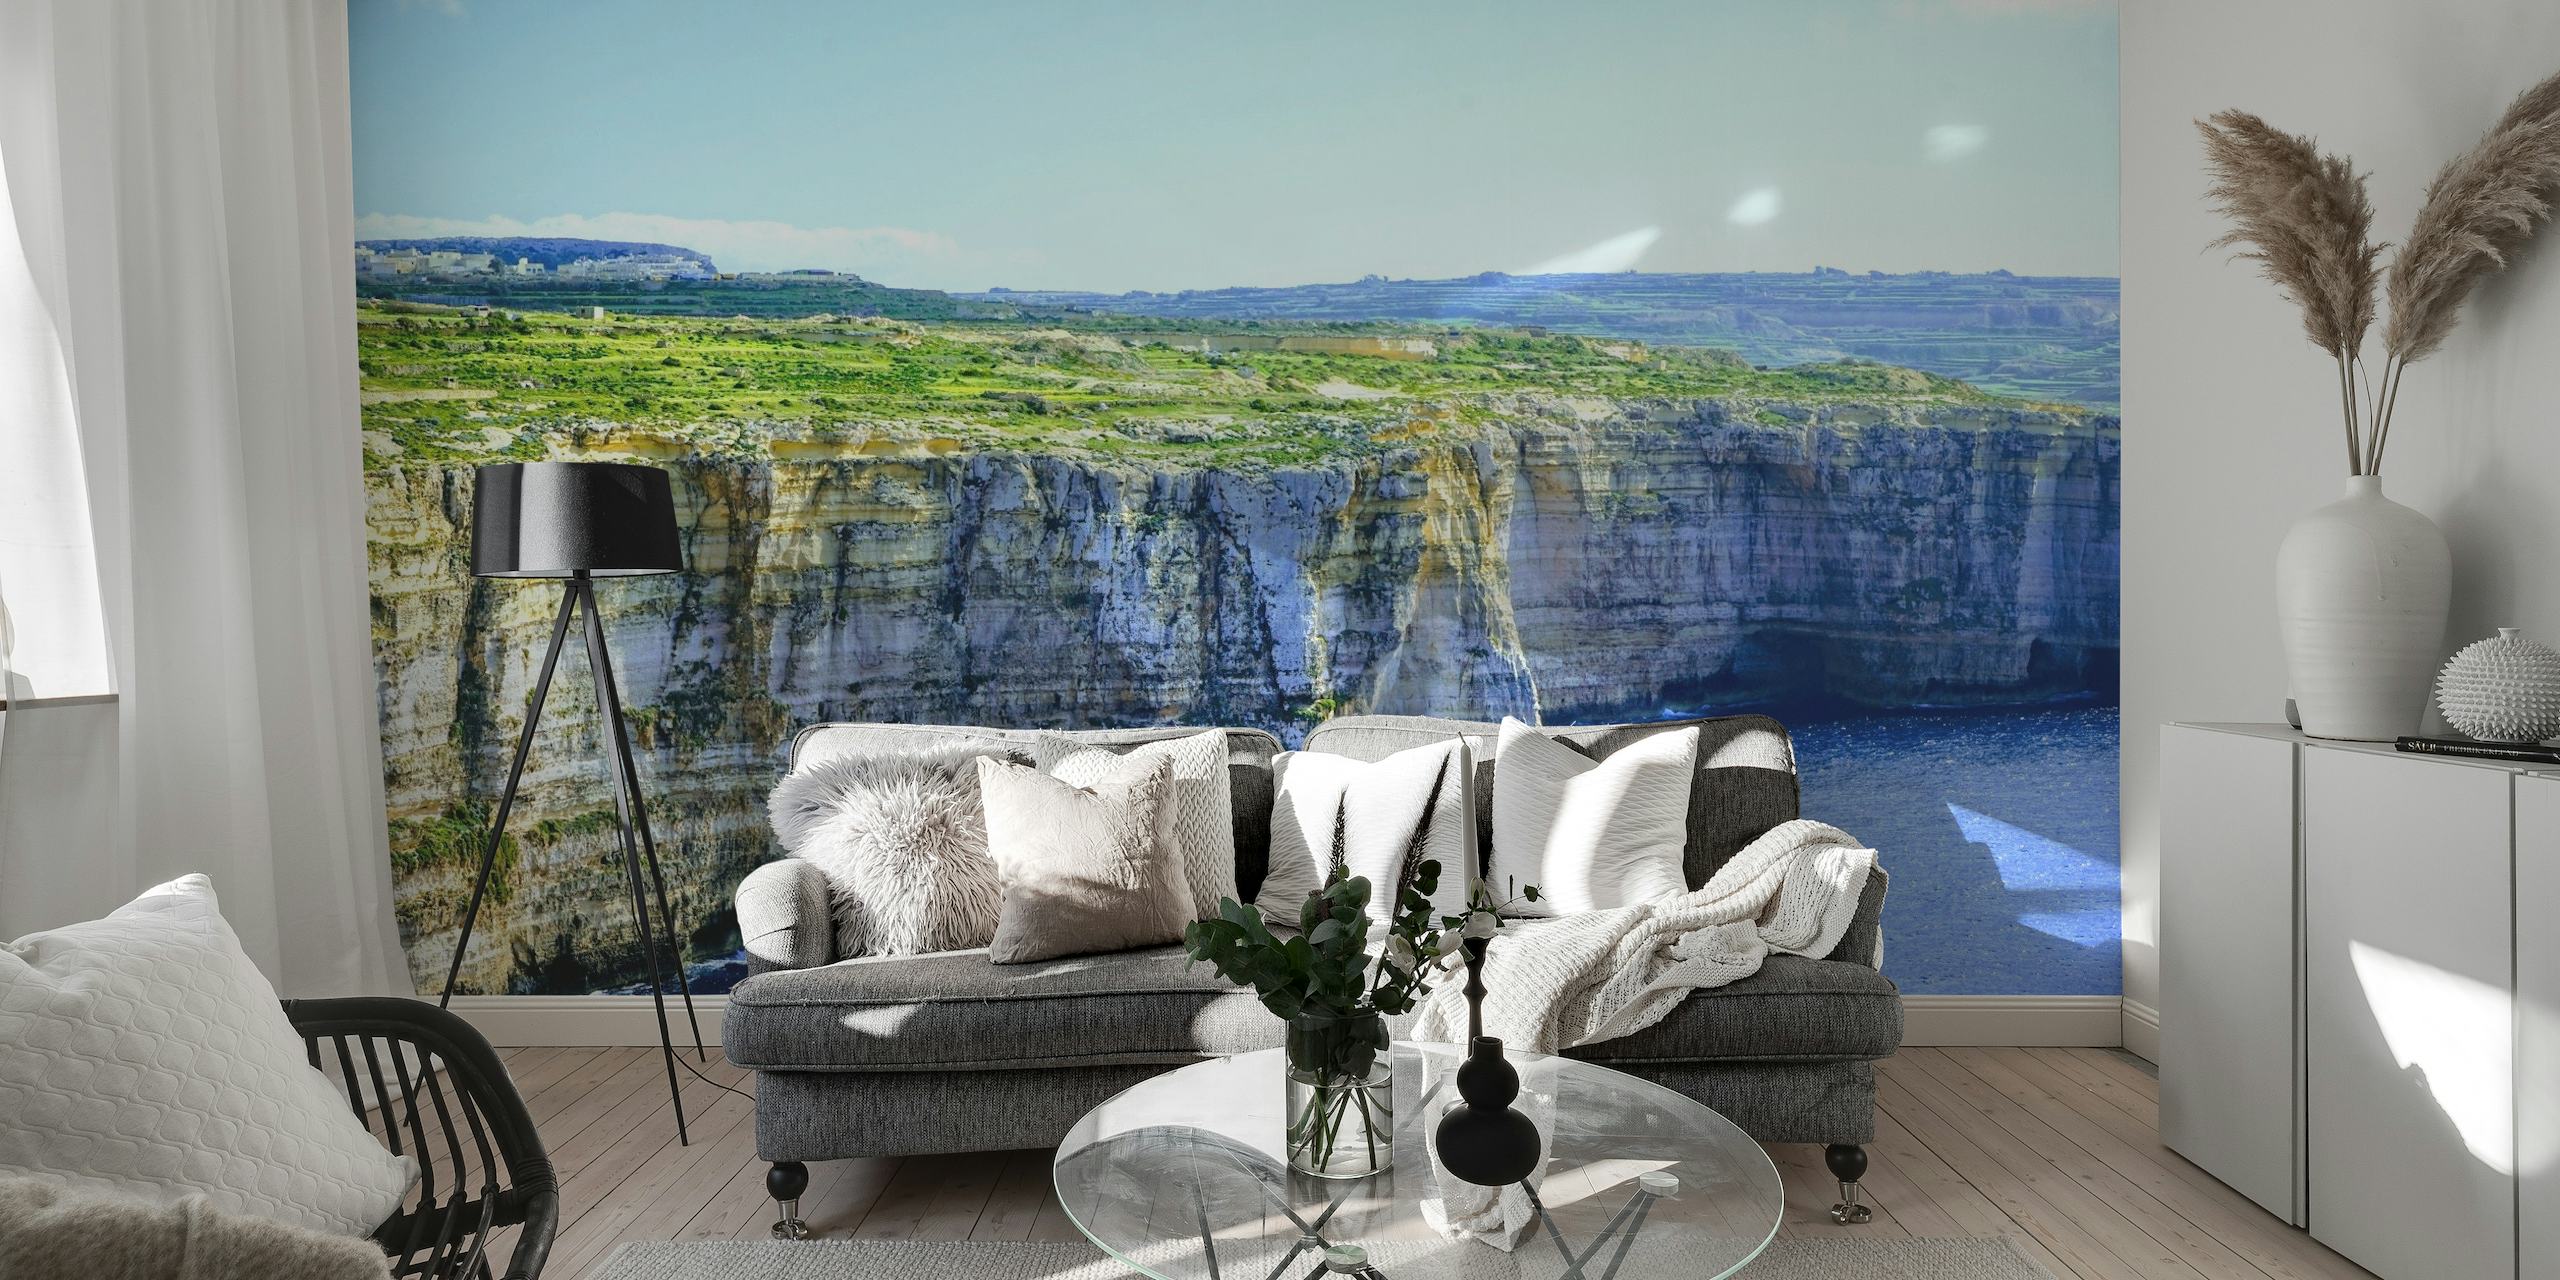 Ocean Bay wall mural showing a cliffside view over vibrant blue water